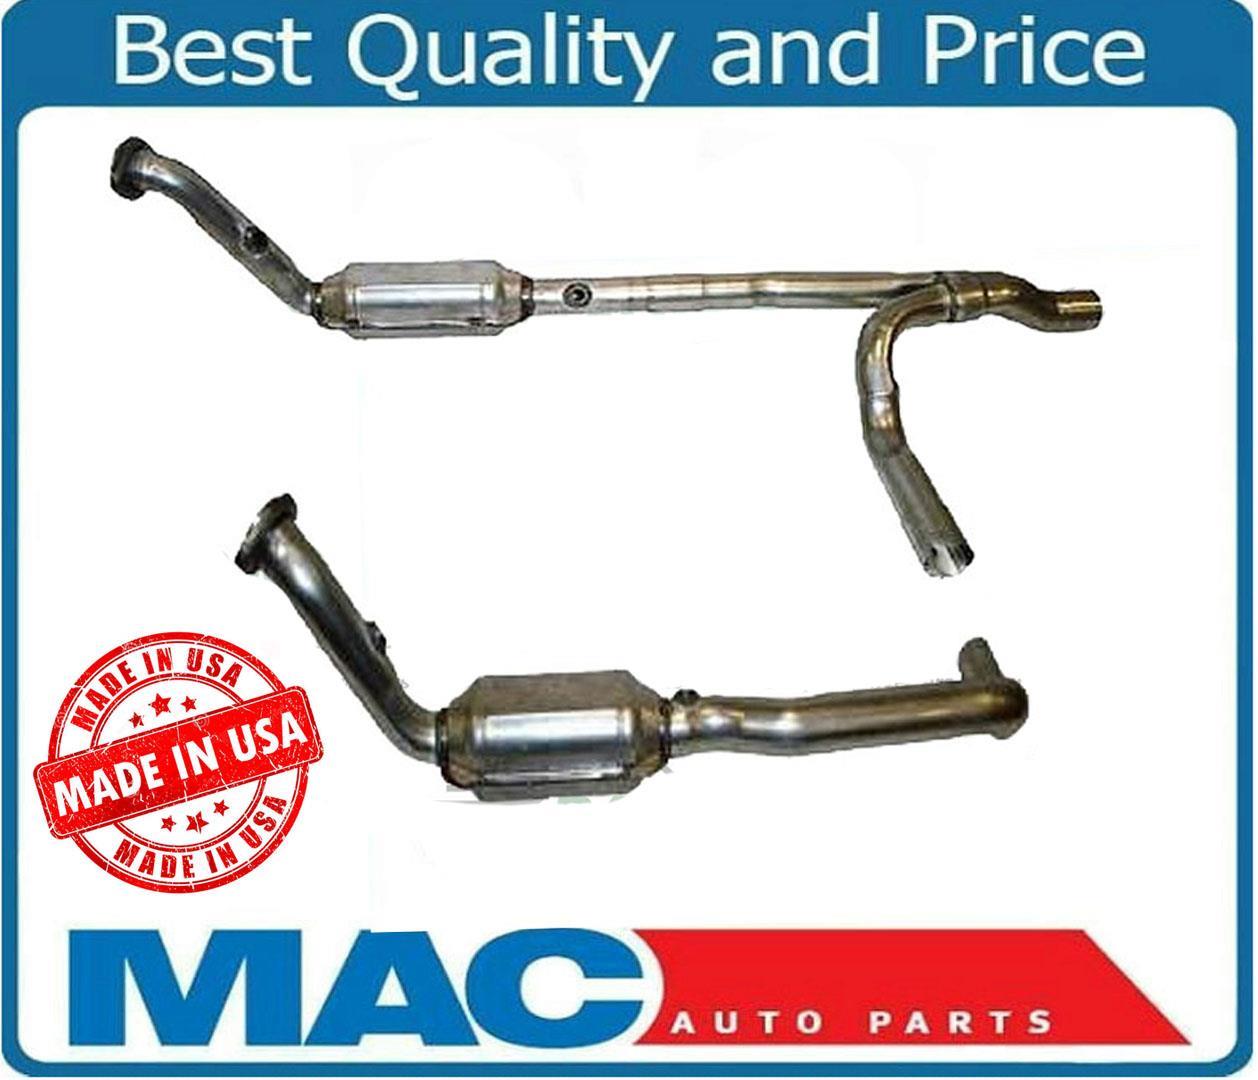 Fits 04-05 Ram 1500 Hemi 5.7L Made in USA D/S & P/S Catalytic Converter | eBay 2005 Dodge Ram 1500 5.7 Catalytic Converter